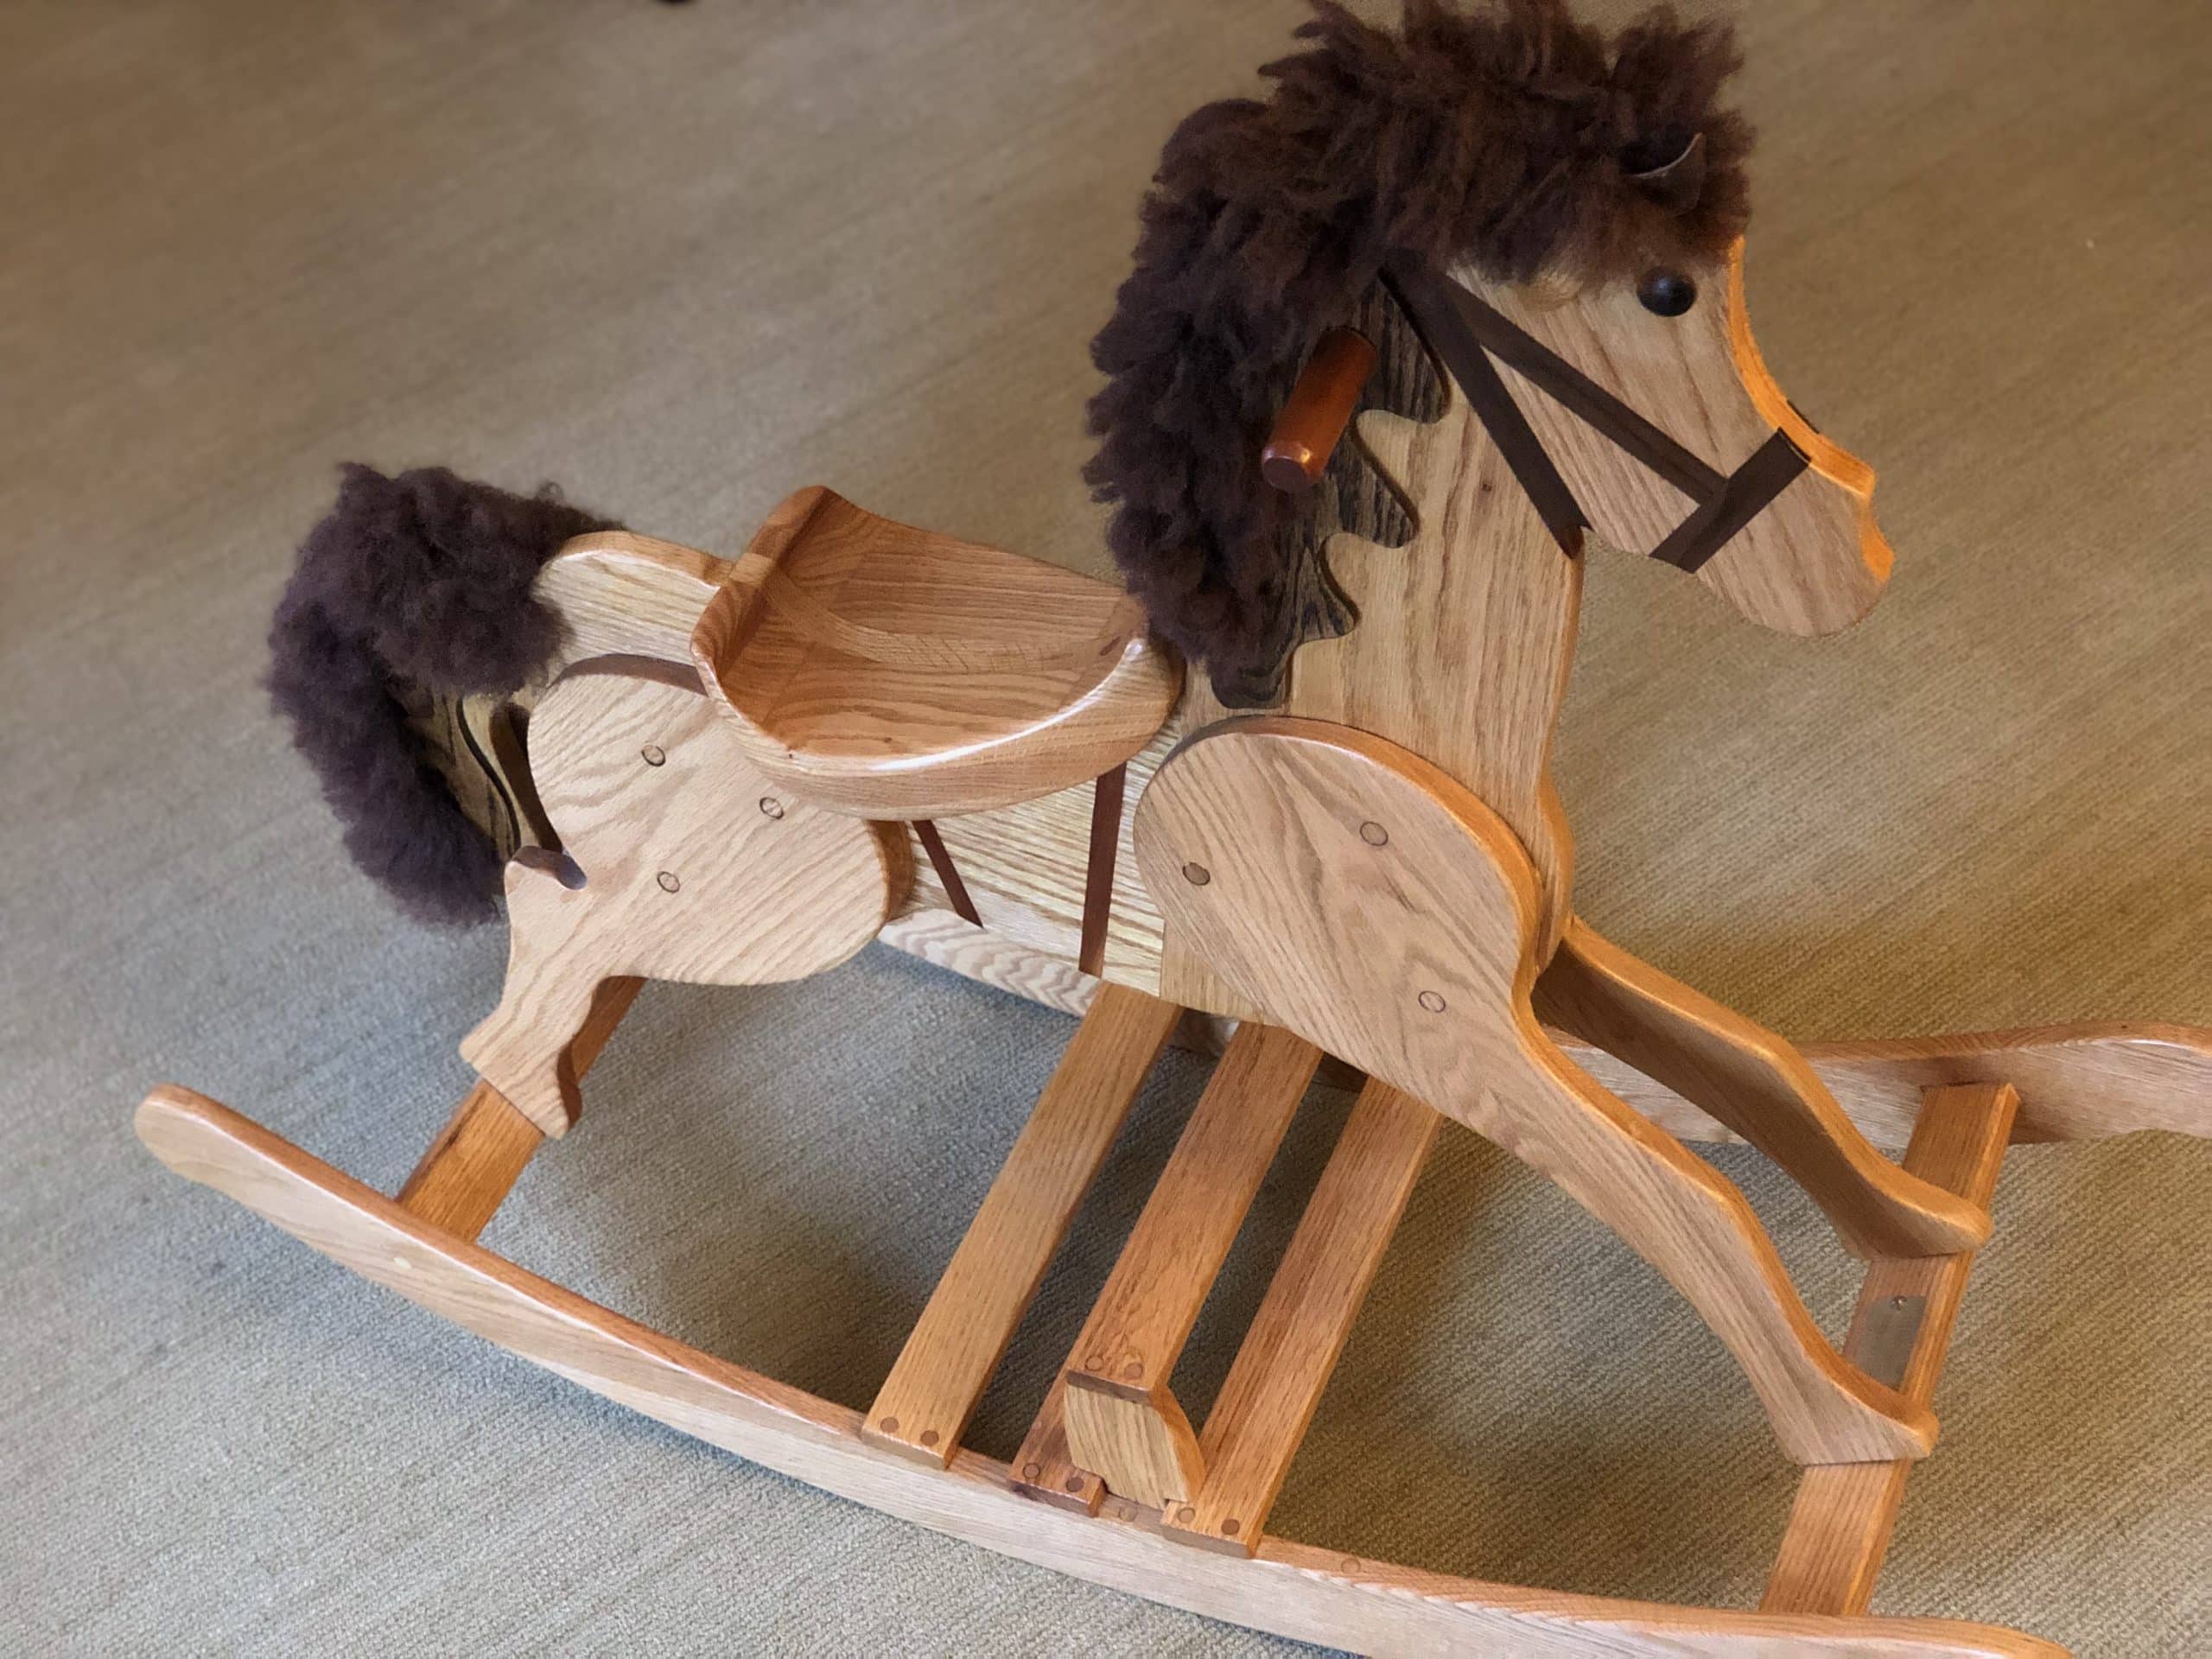 Oak Hobby Horse with walnut inlay bridle and macrame mayne and tail